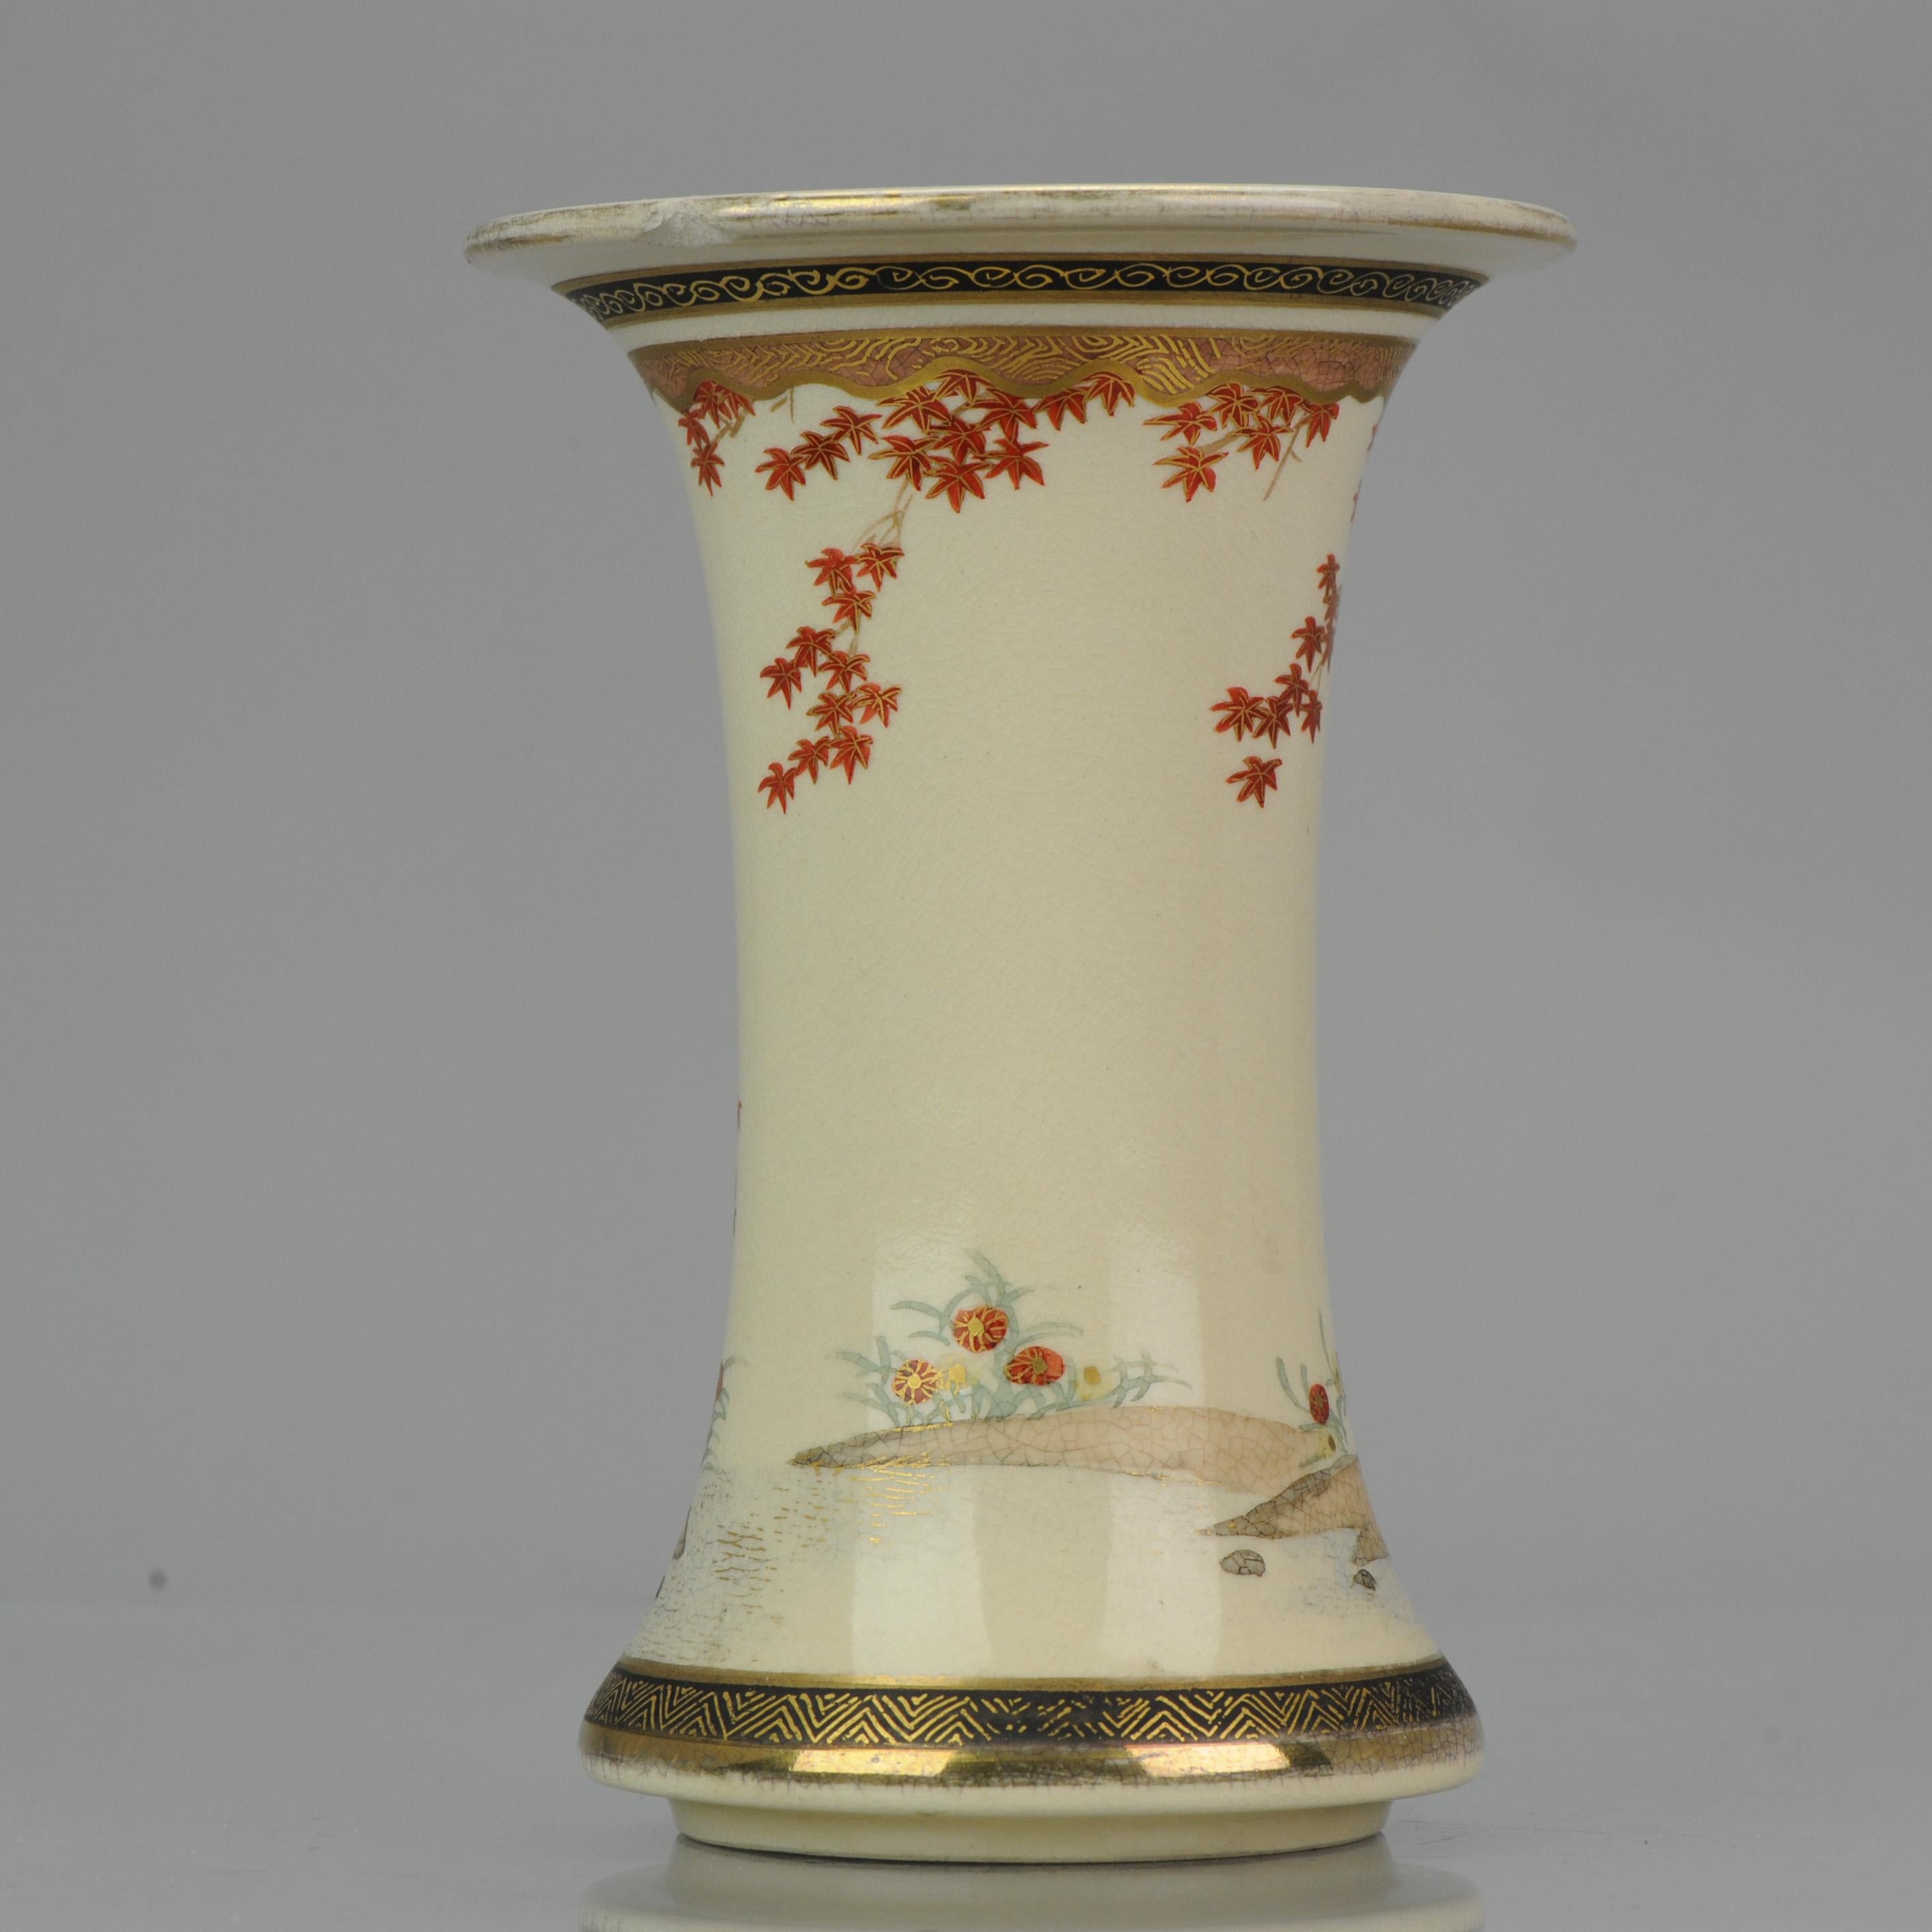 A Faboulas Japanese Satsuma vase, Meiji period

Of beaker form with everted rim and foot, decorated with flowering plants, a tree with birds on a branch and blossoms.

Marked at base.

Additional information:
Material: Porcelain & Pottery
Region of